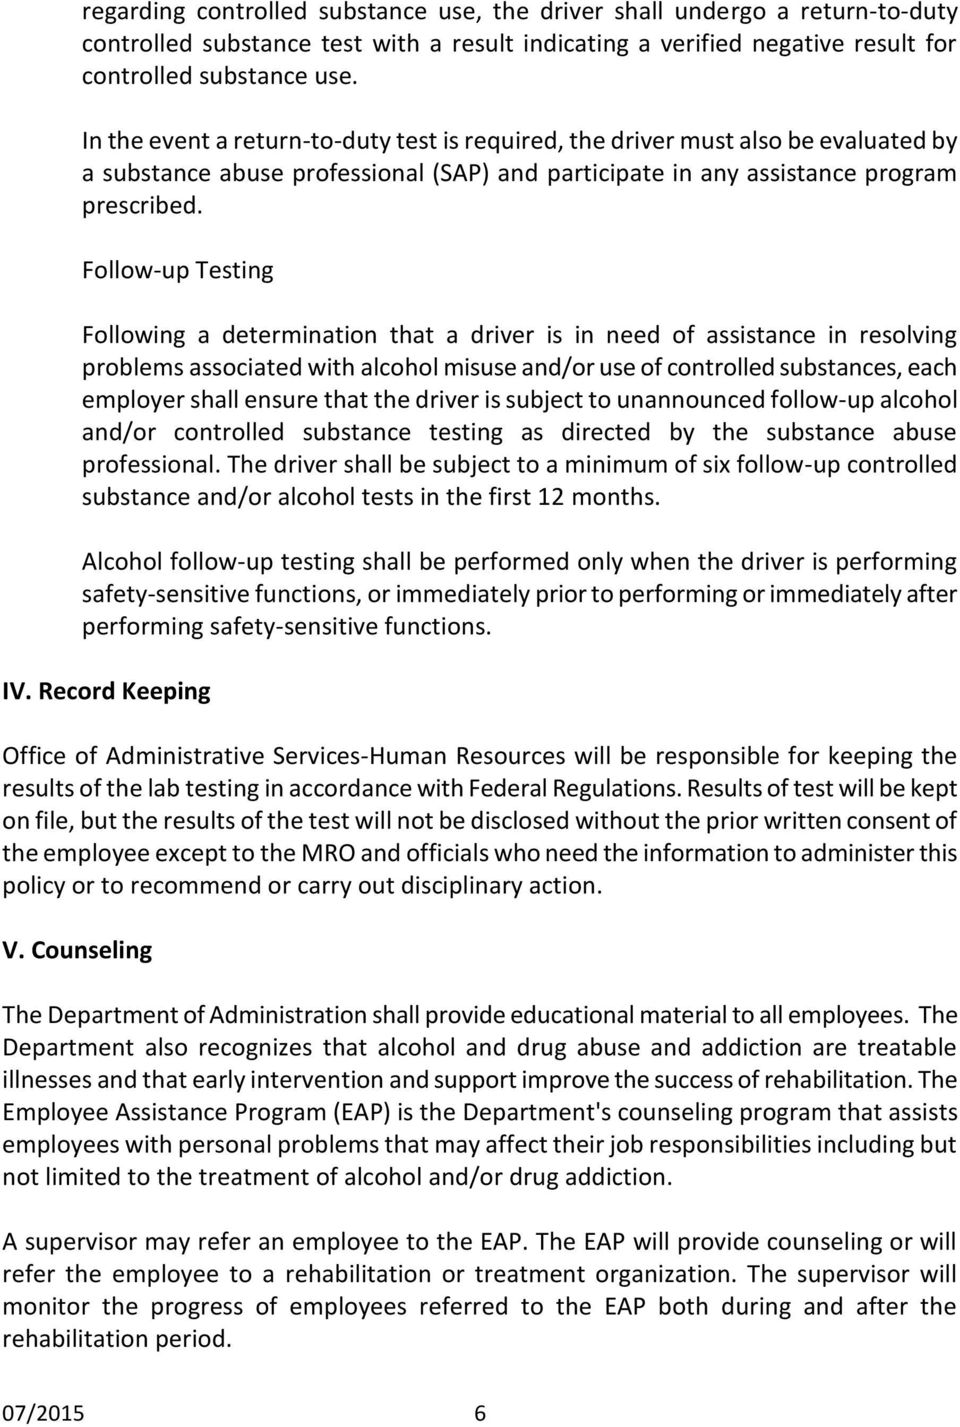 Follow-up Testing Following a determination that a driver is in need of assistance in resolving problems associated with alcohol misuse and/or use of controlled substances, each employer shall ensure